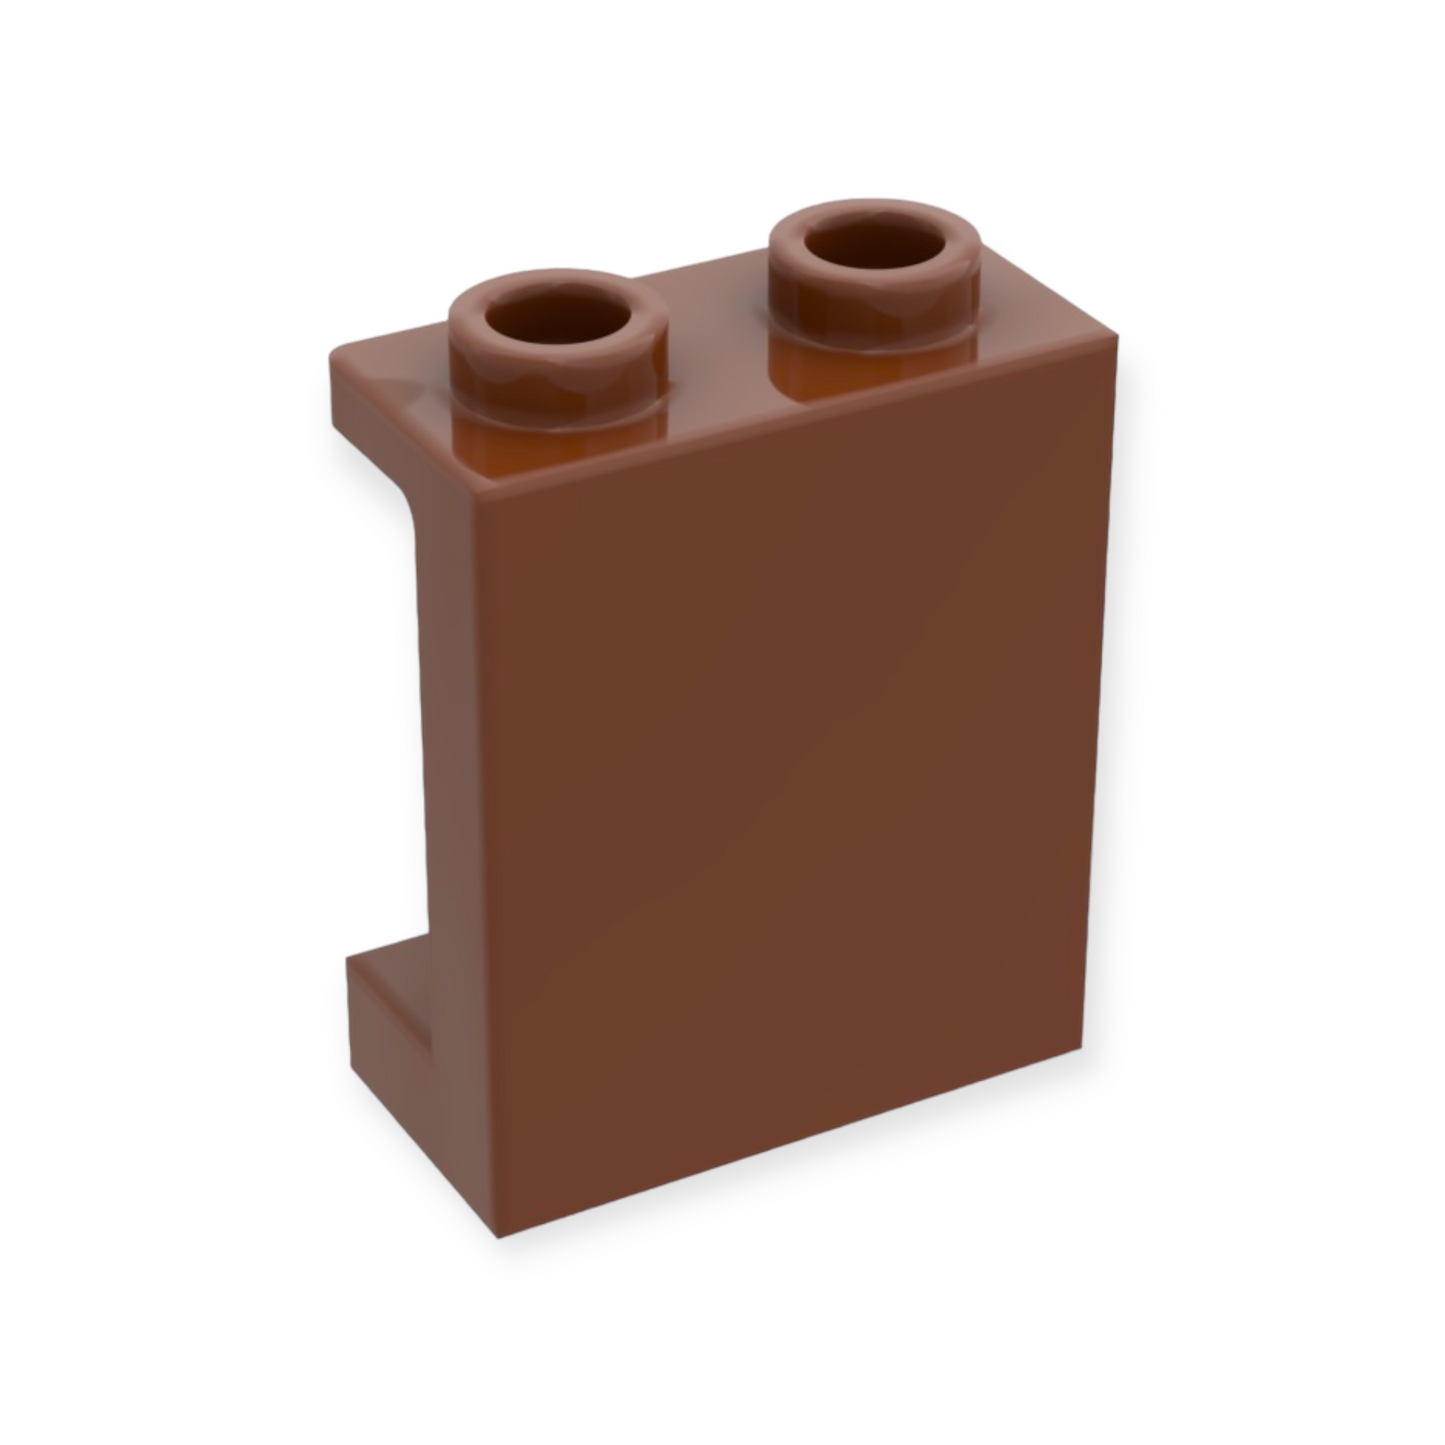 LEGO Panel 1x2x2 with Side Supports - in Reddish Brown